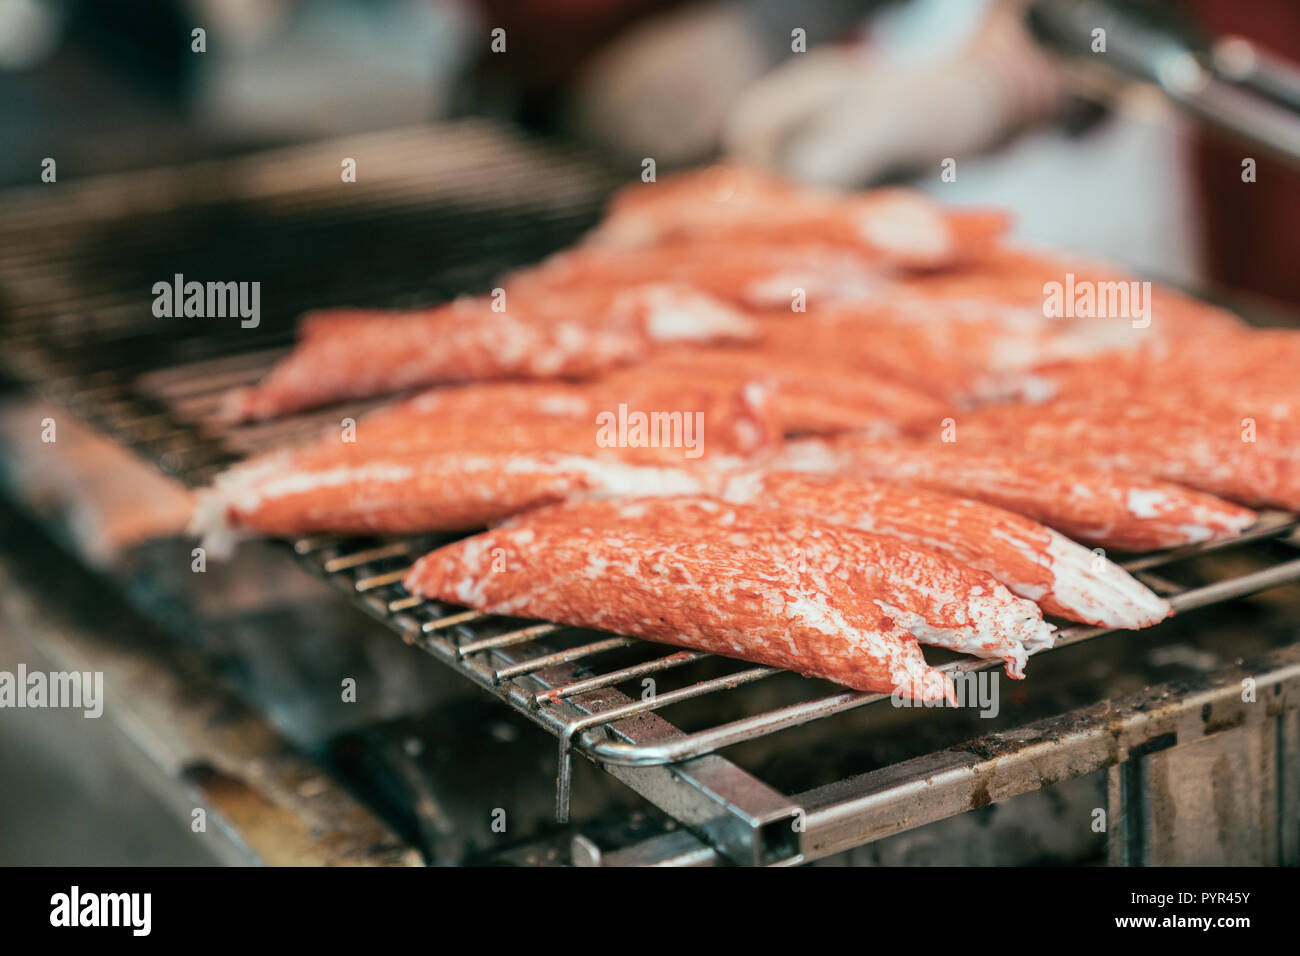 delicious japanese street food red crab. Clusters of fresh snow crab legs cooking on iron plate. hot grilled seafood in japan traditional market. Stock Photo